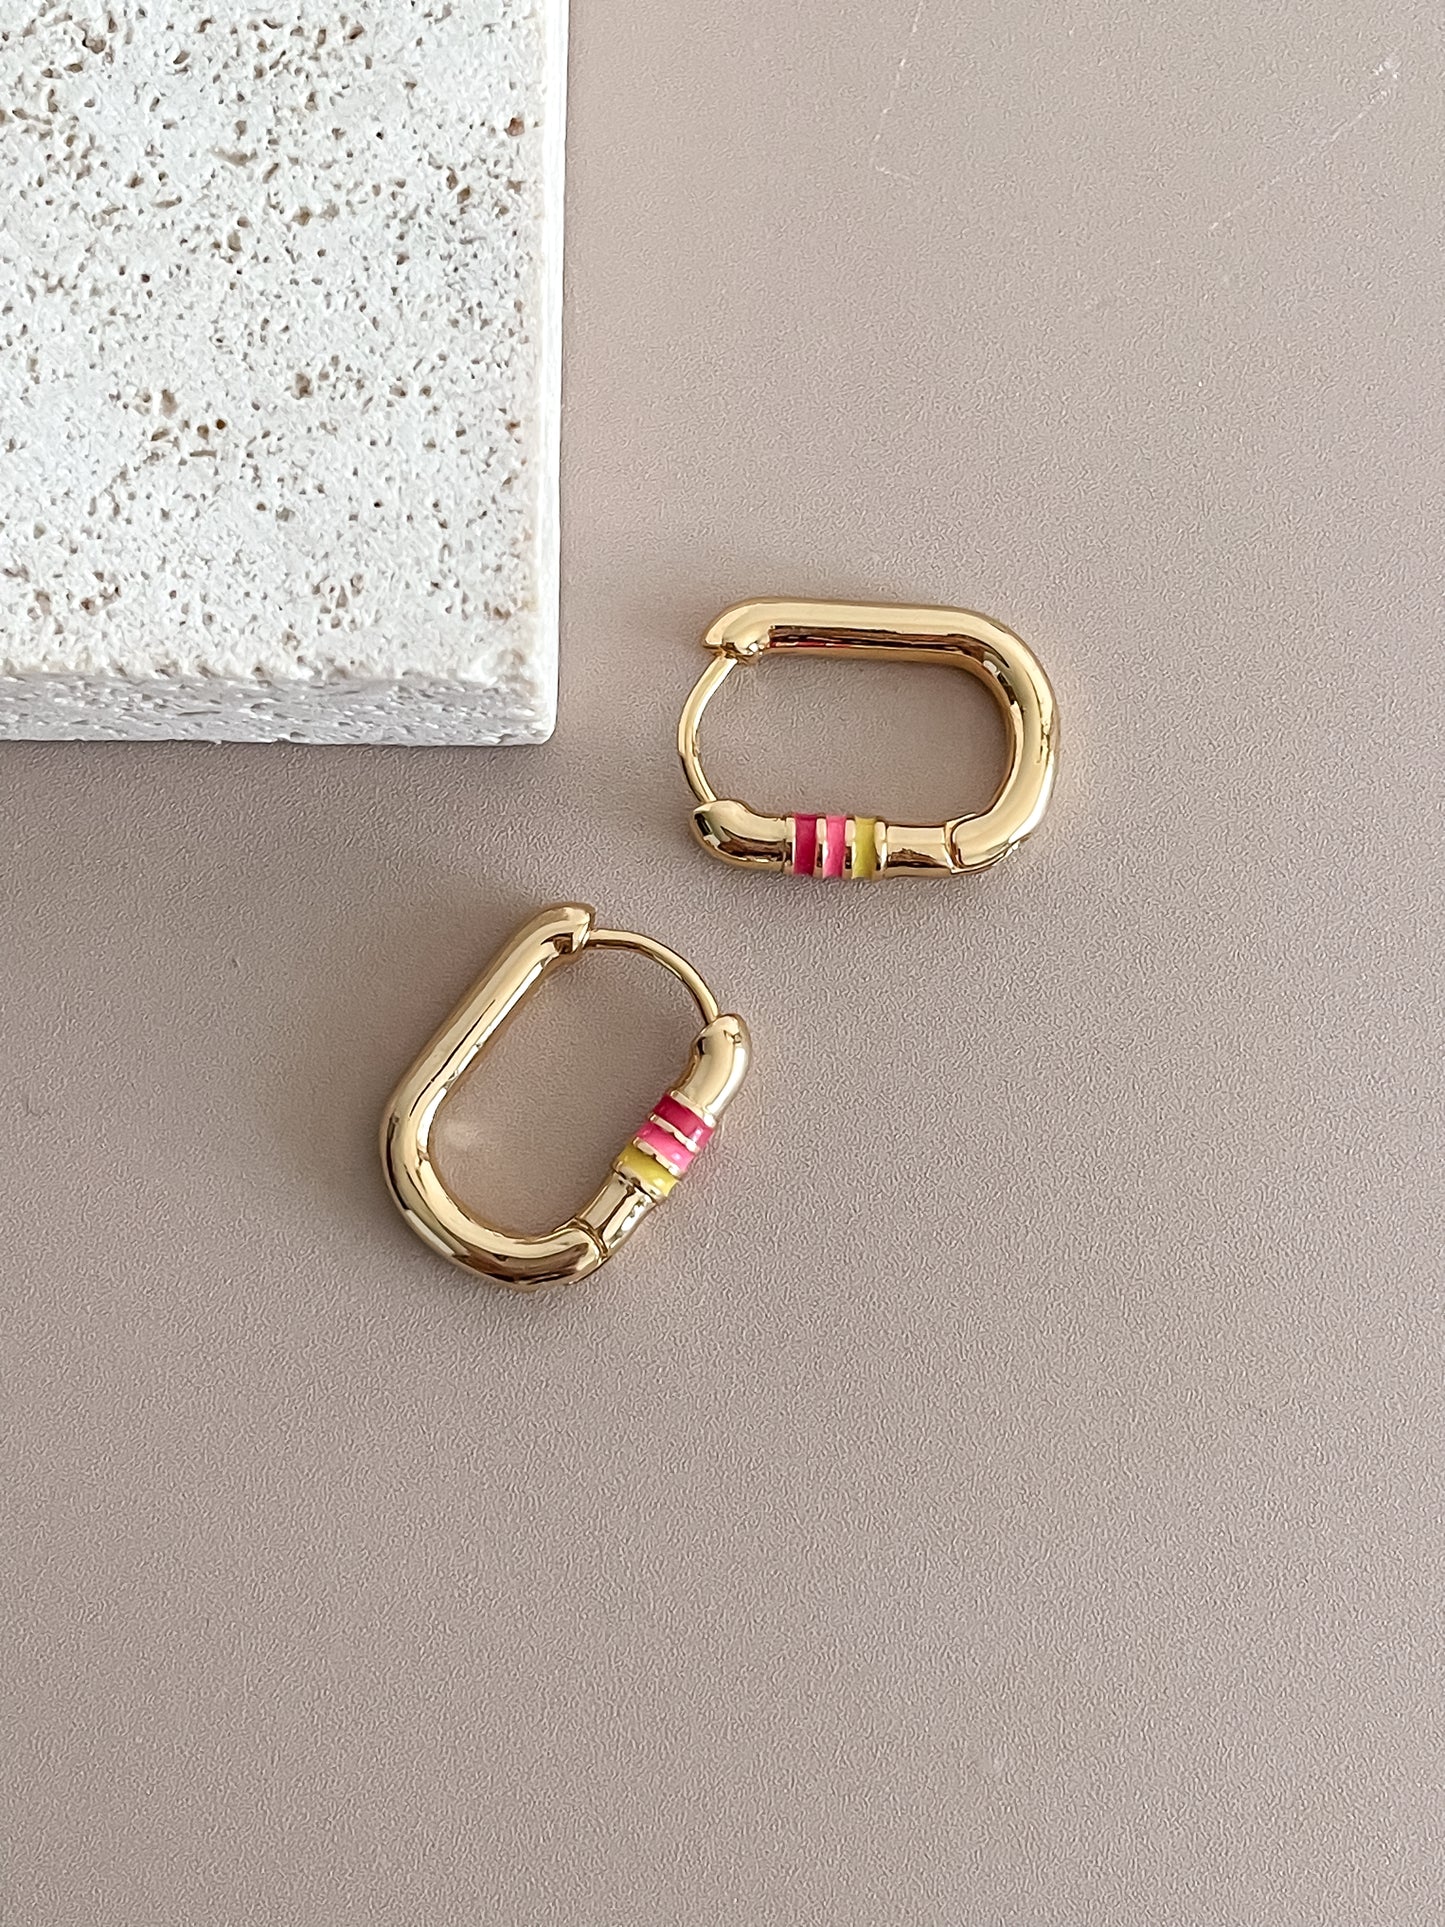 Oval Gold Colored Earrings